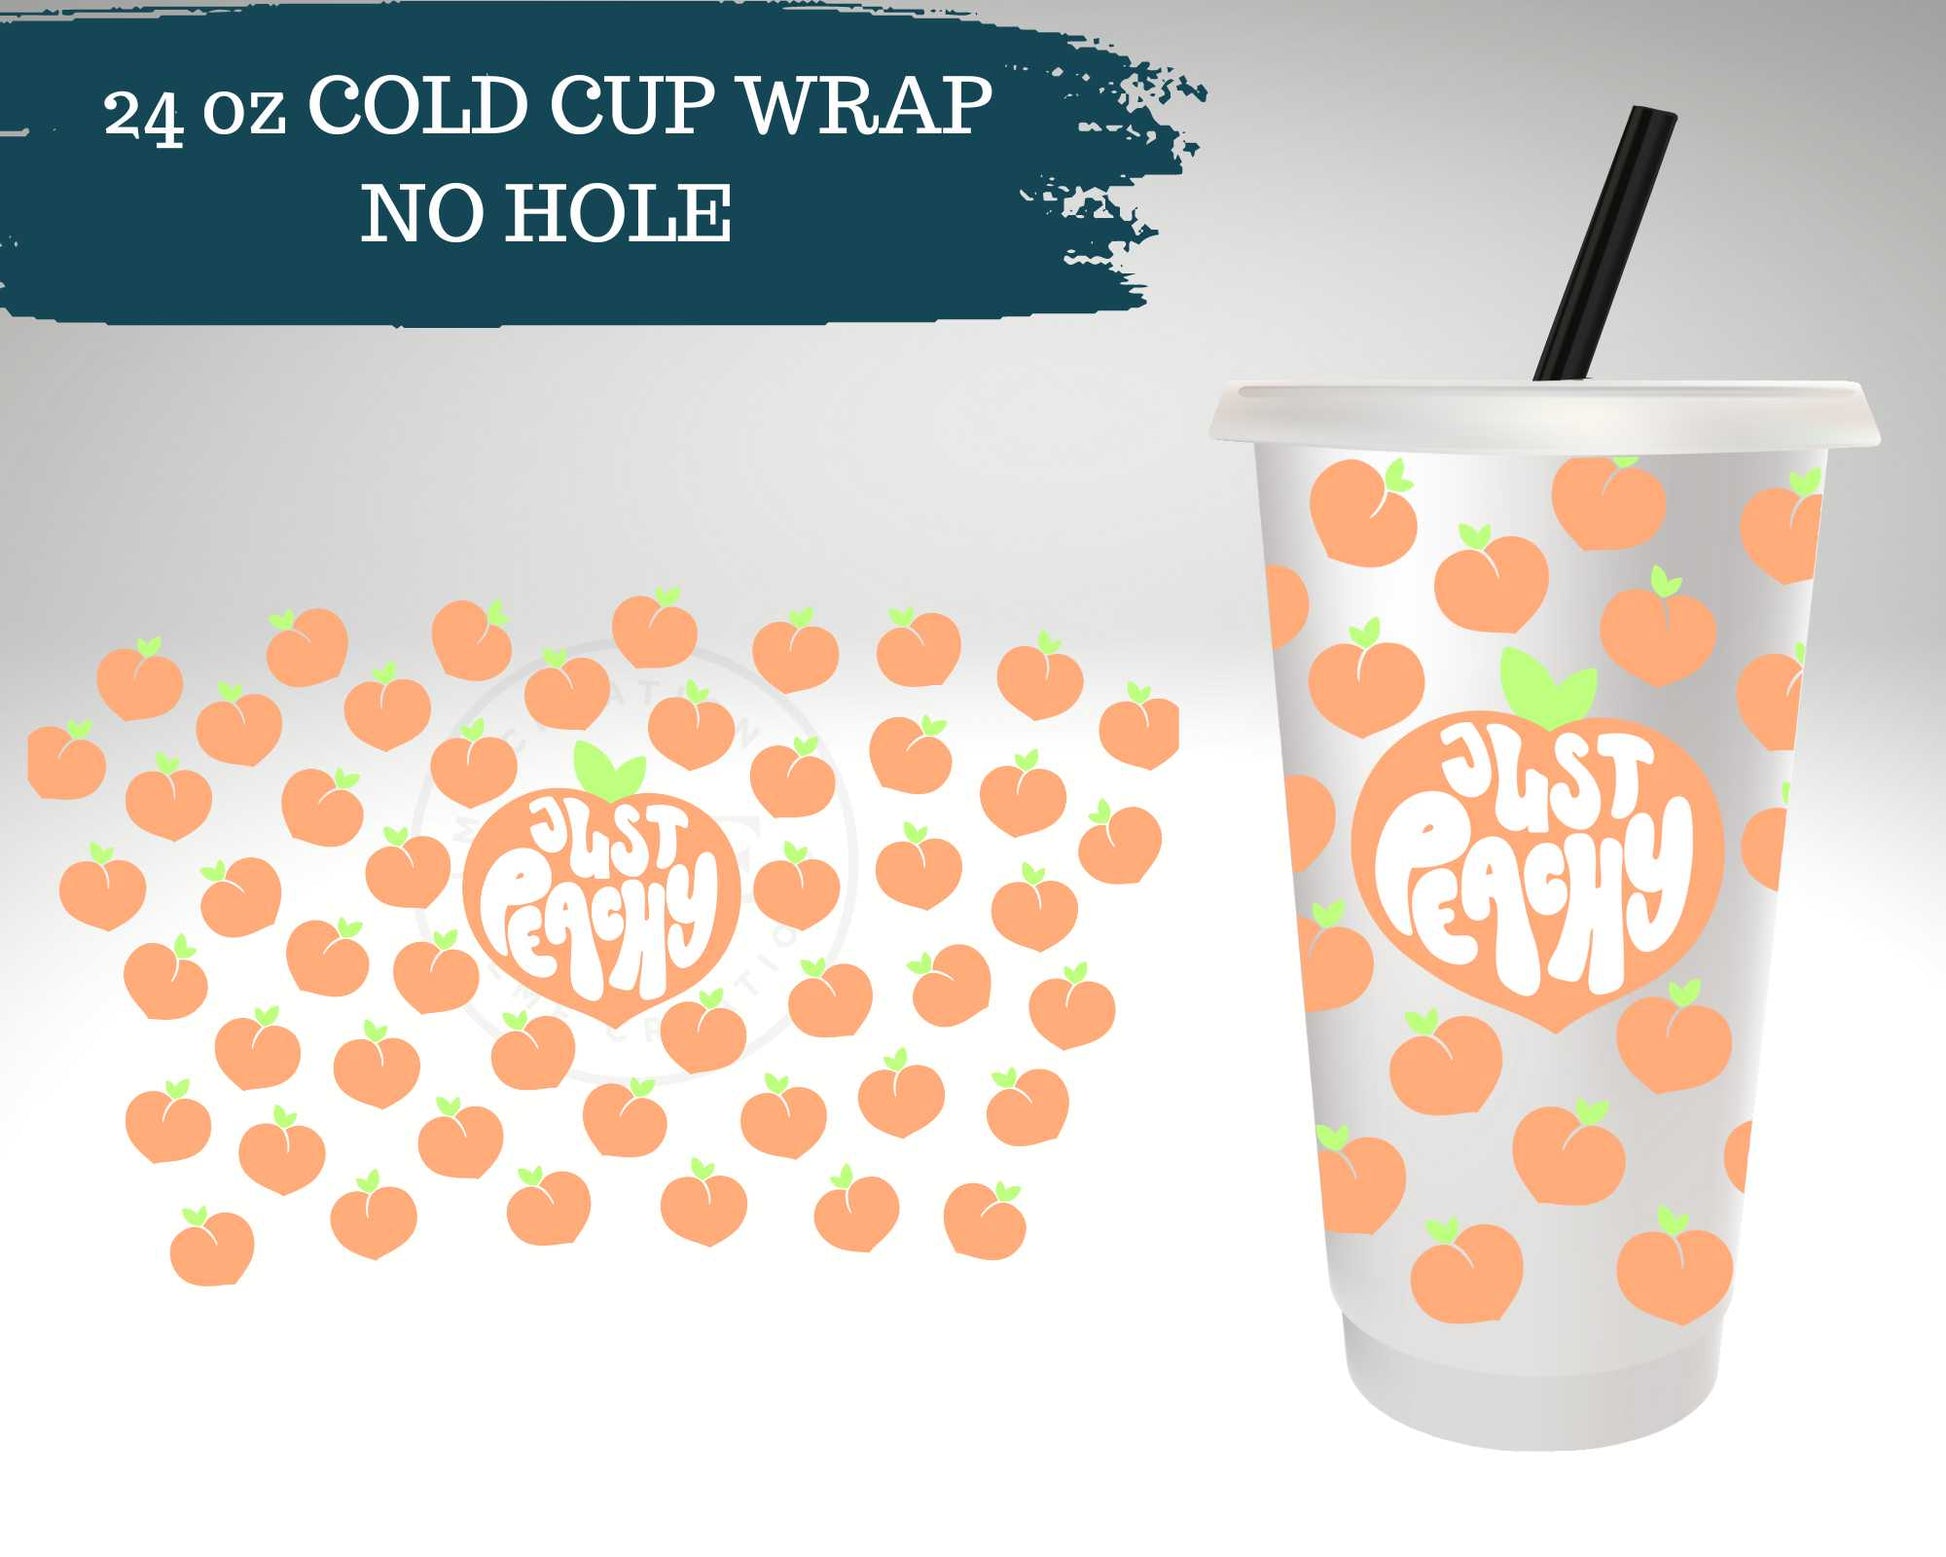 Just Peachy | NO HOLE | 24 oz Cold Cup